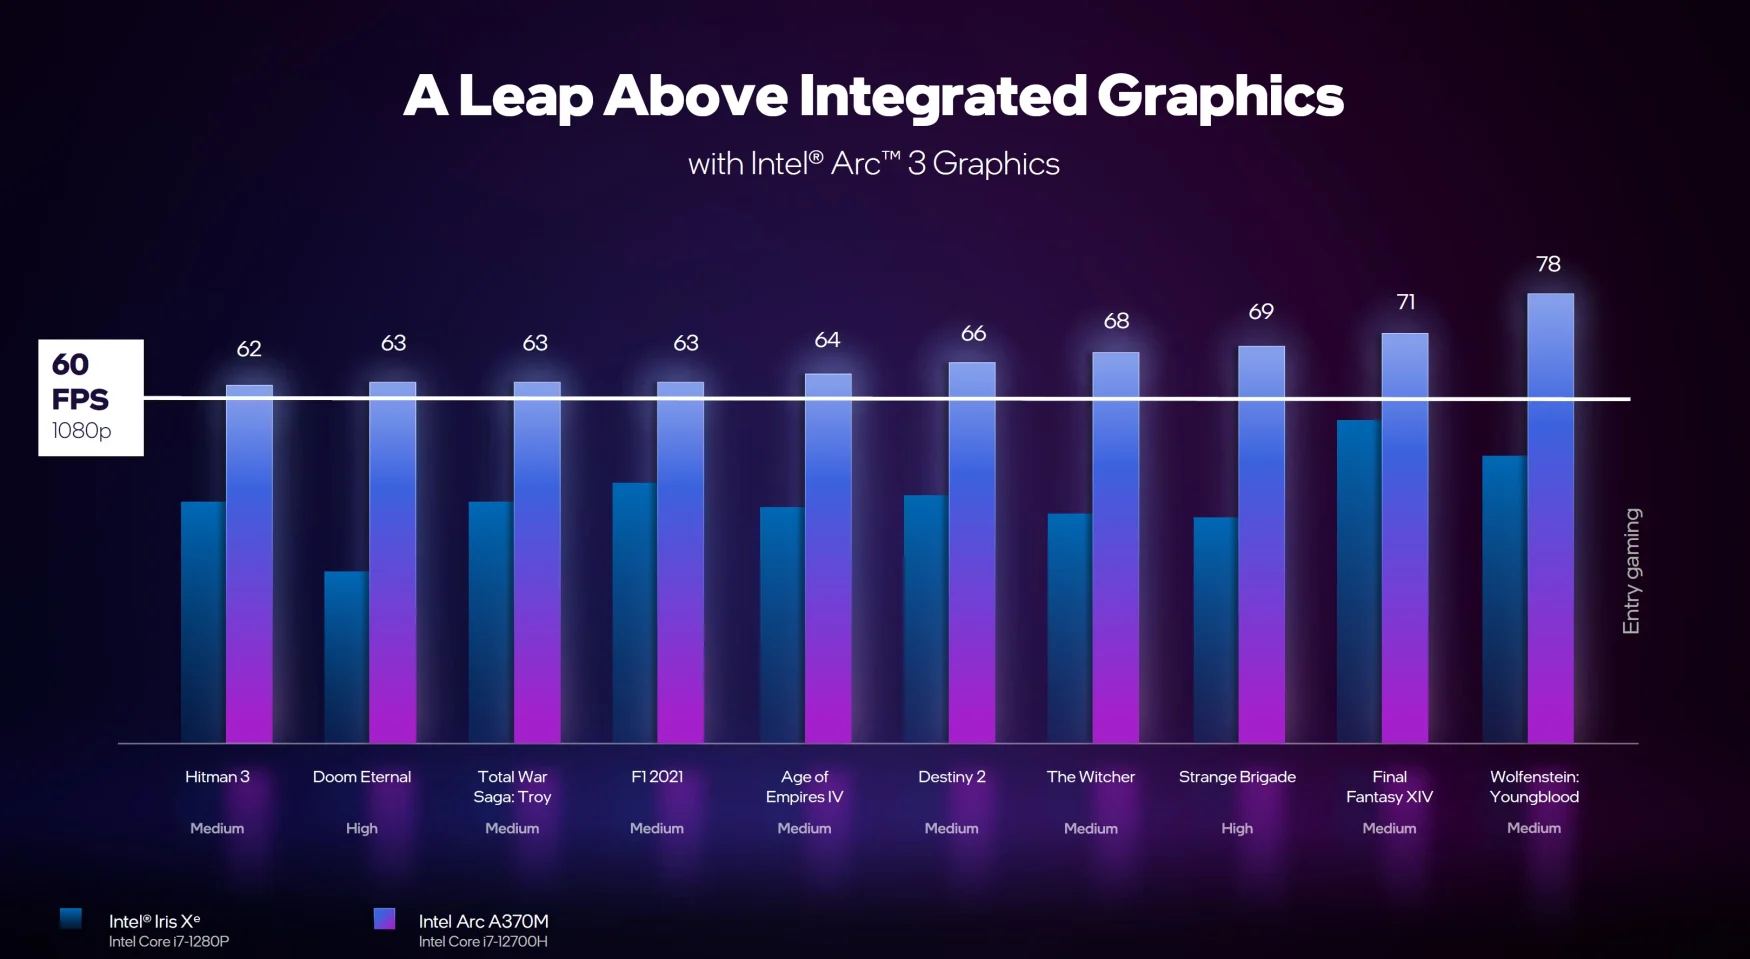 According to an infographic from Intel, the new Arc 3 GPUs should provide a significant performance boost compared to Iris XE integrated graphics